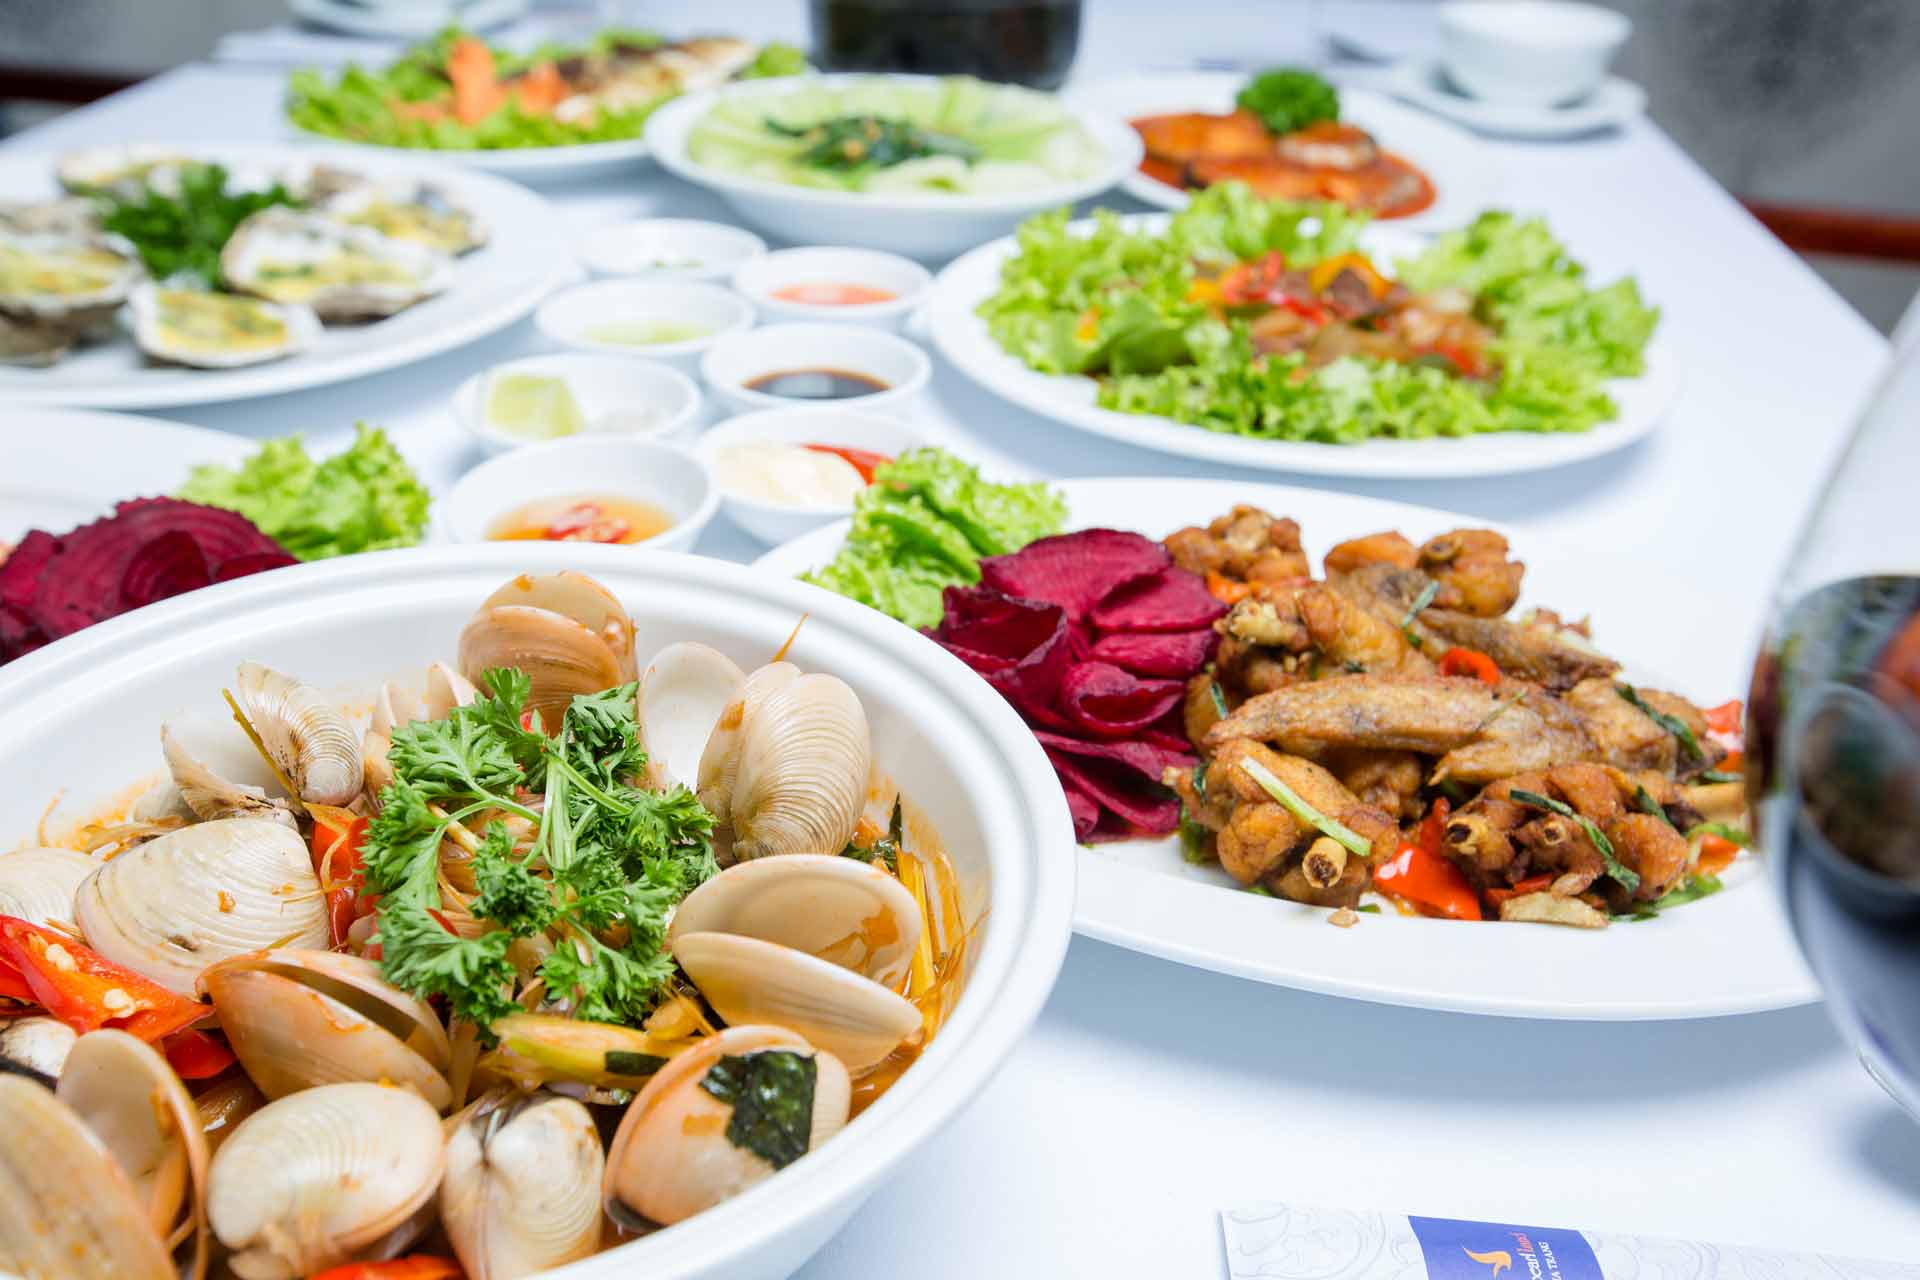 A plate of seafood served in a restaurant in Ha Long Bay